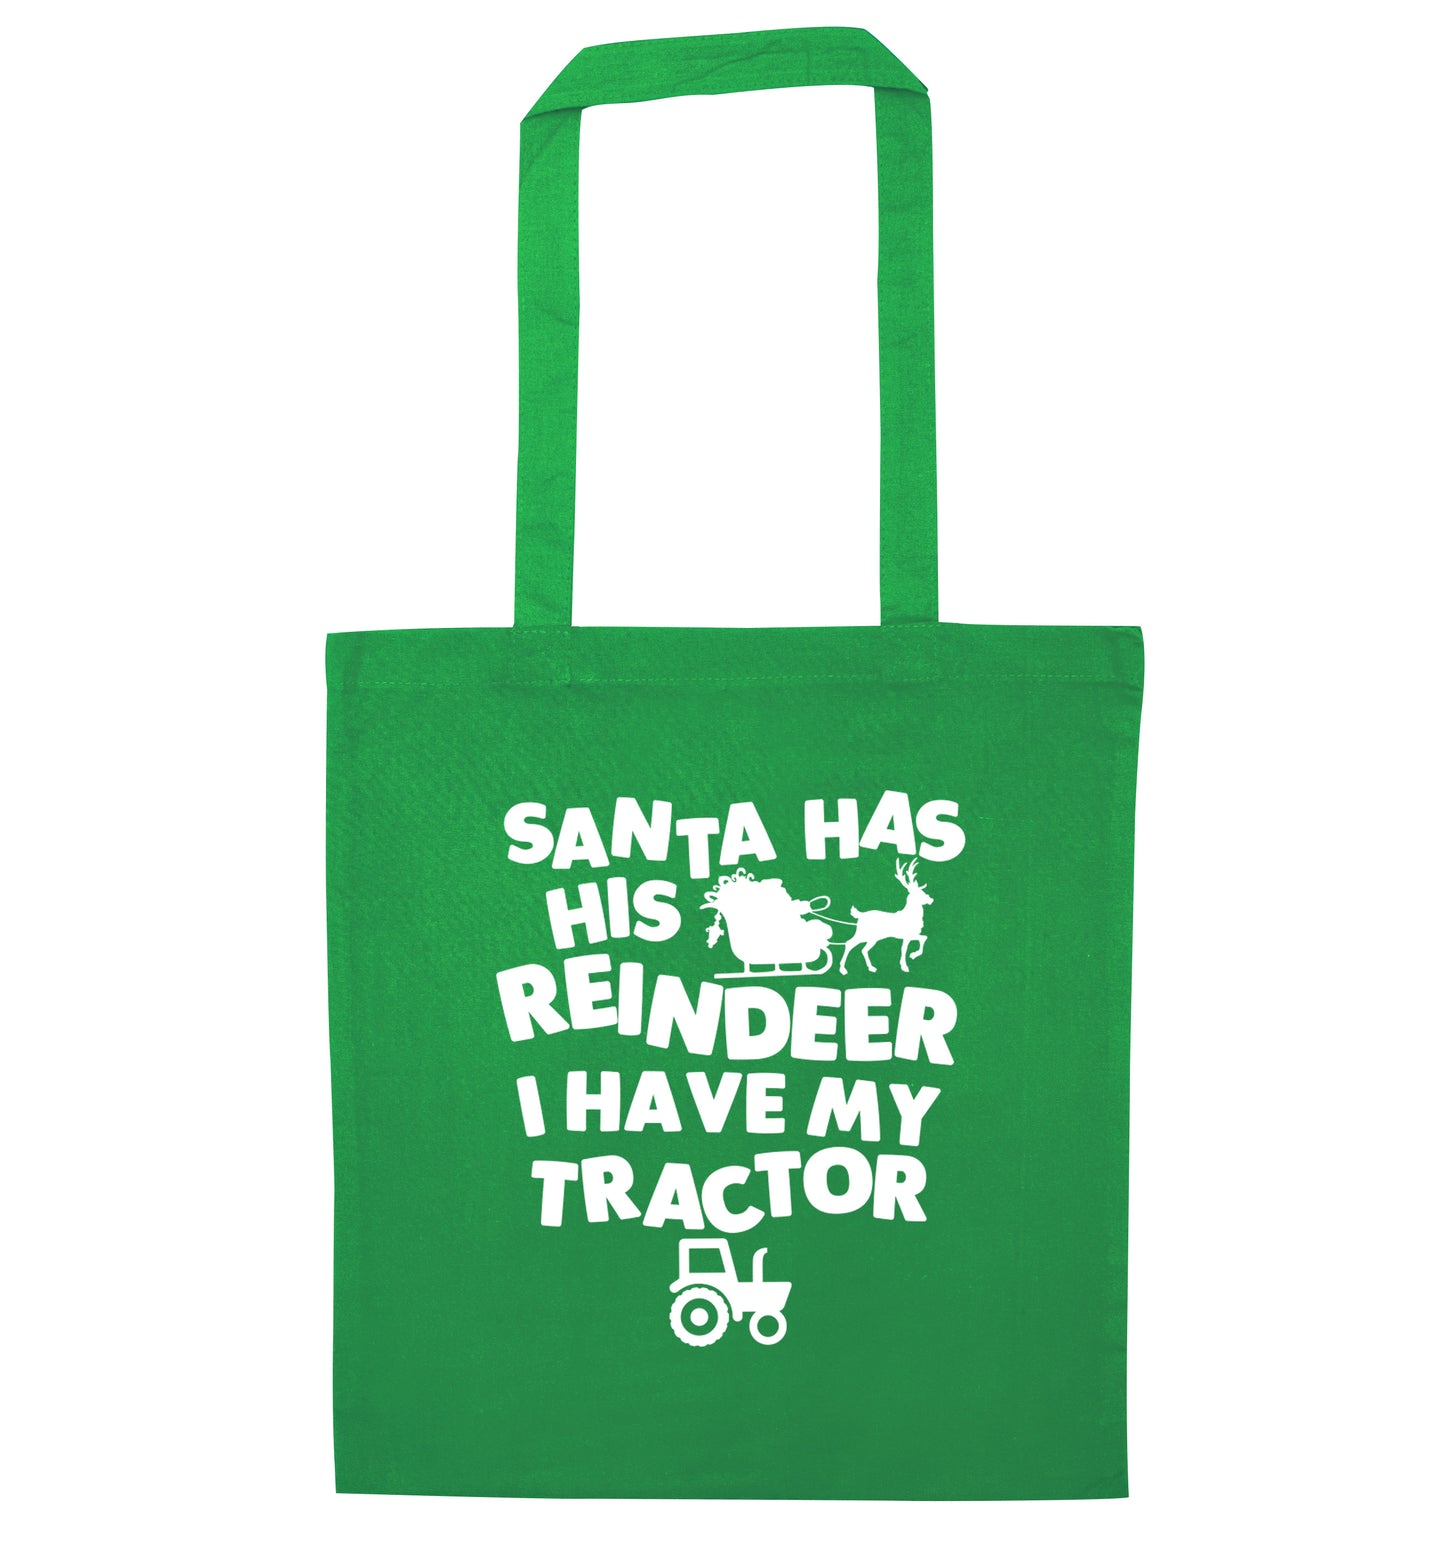 Santa has his reindeer I have my tractor green tote bag